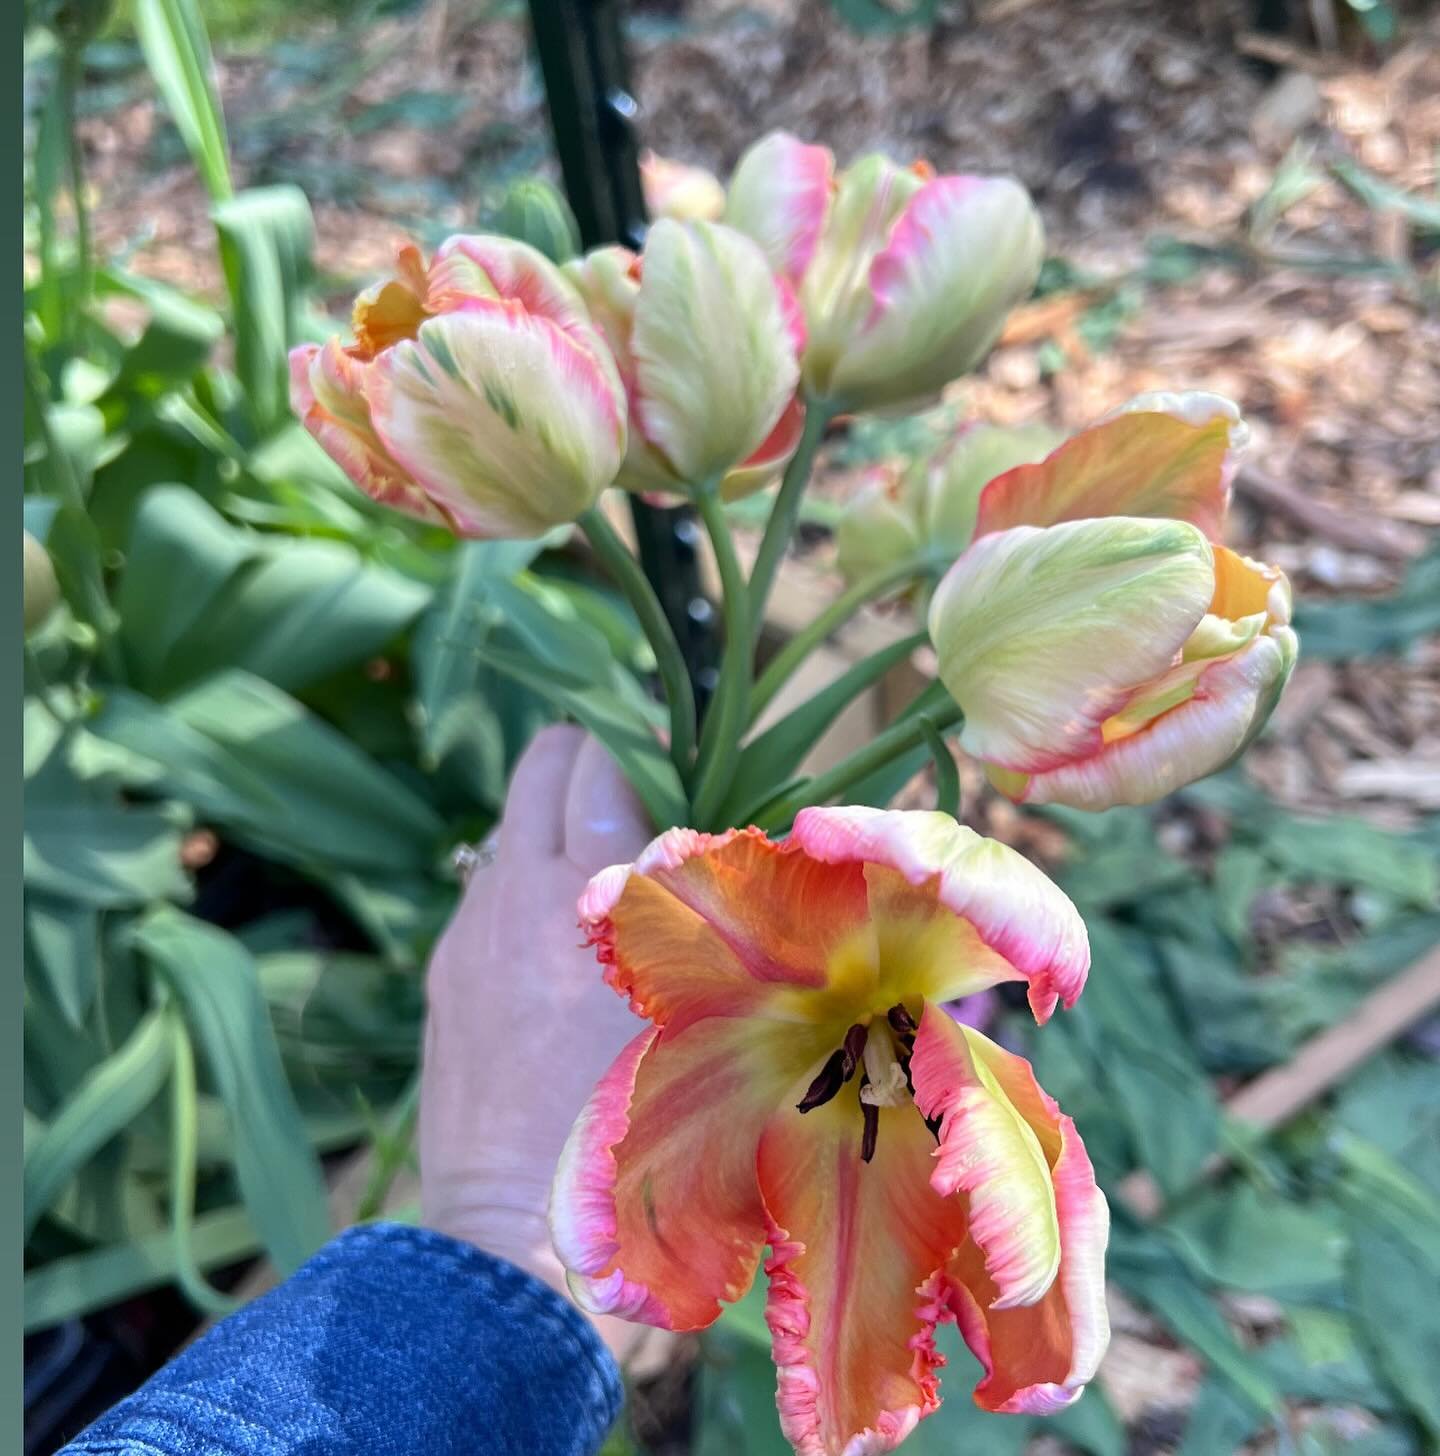 Spring things 🌷

1. Apricot parrot tulips (the pic I frantically texted @lavenderandposies this morning to see if they were too far gone to store)
2. Tulips chilling in the shade before going in the cooler- the red ones (gudoshnik doubles) are GIGAN